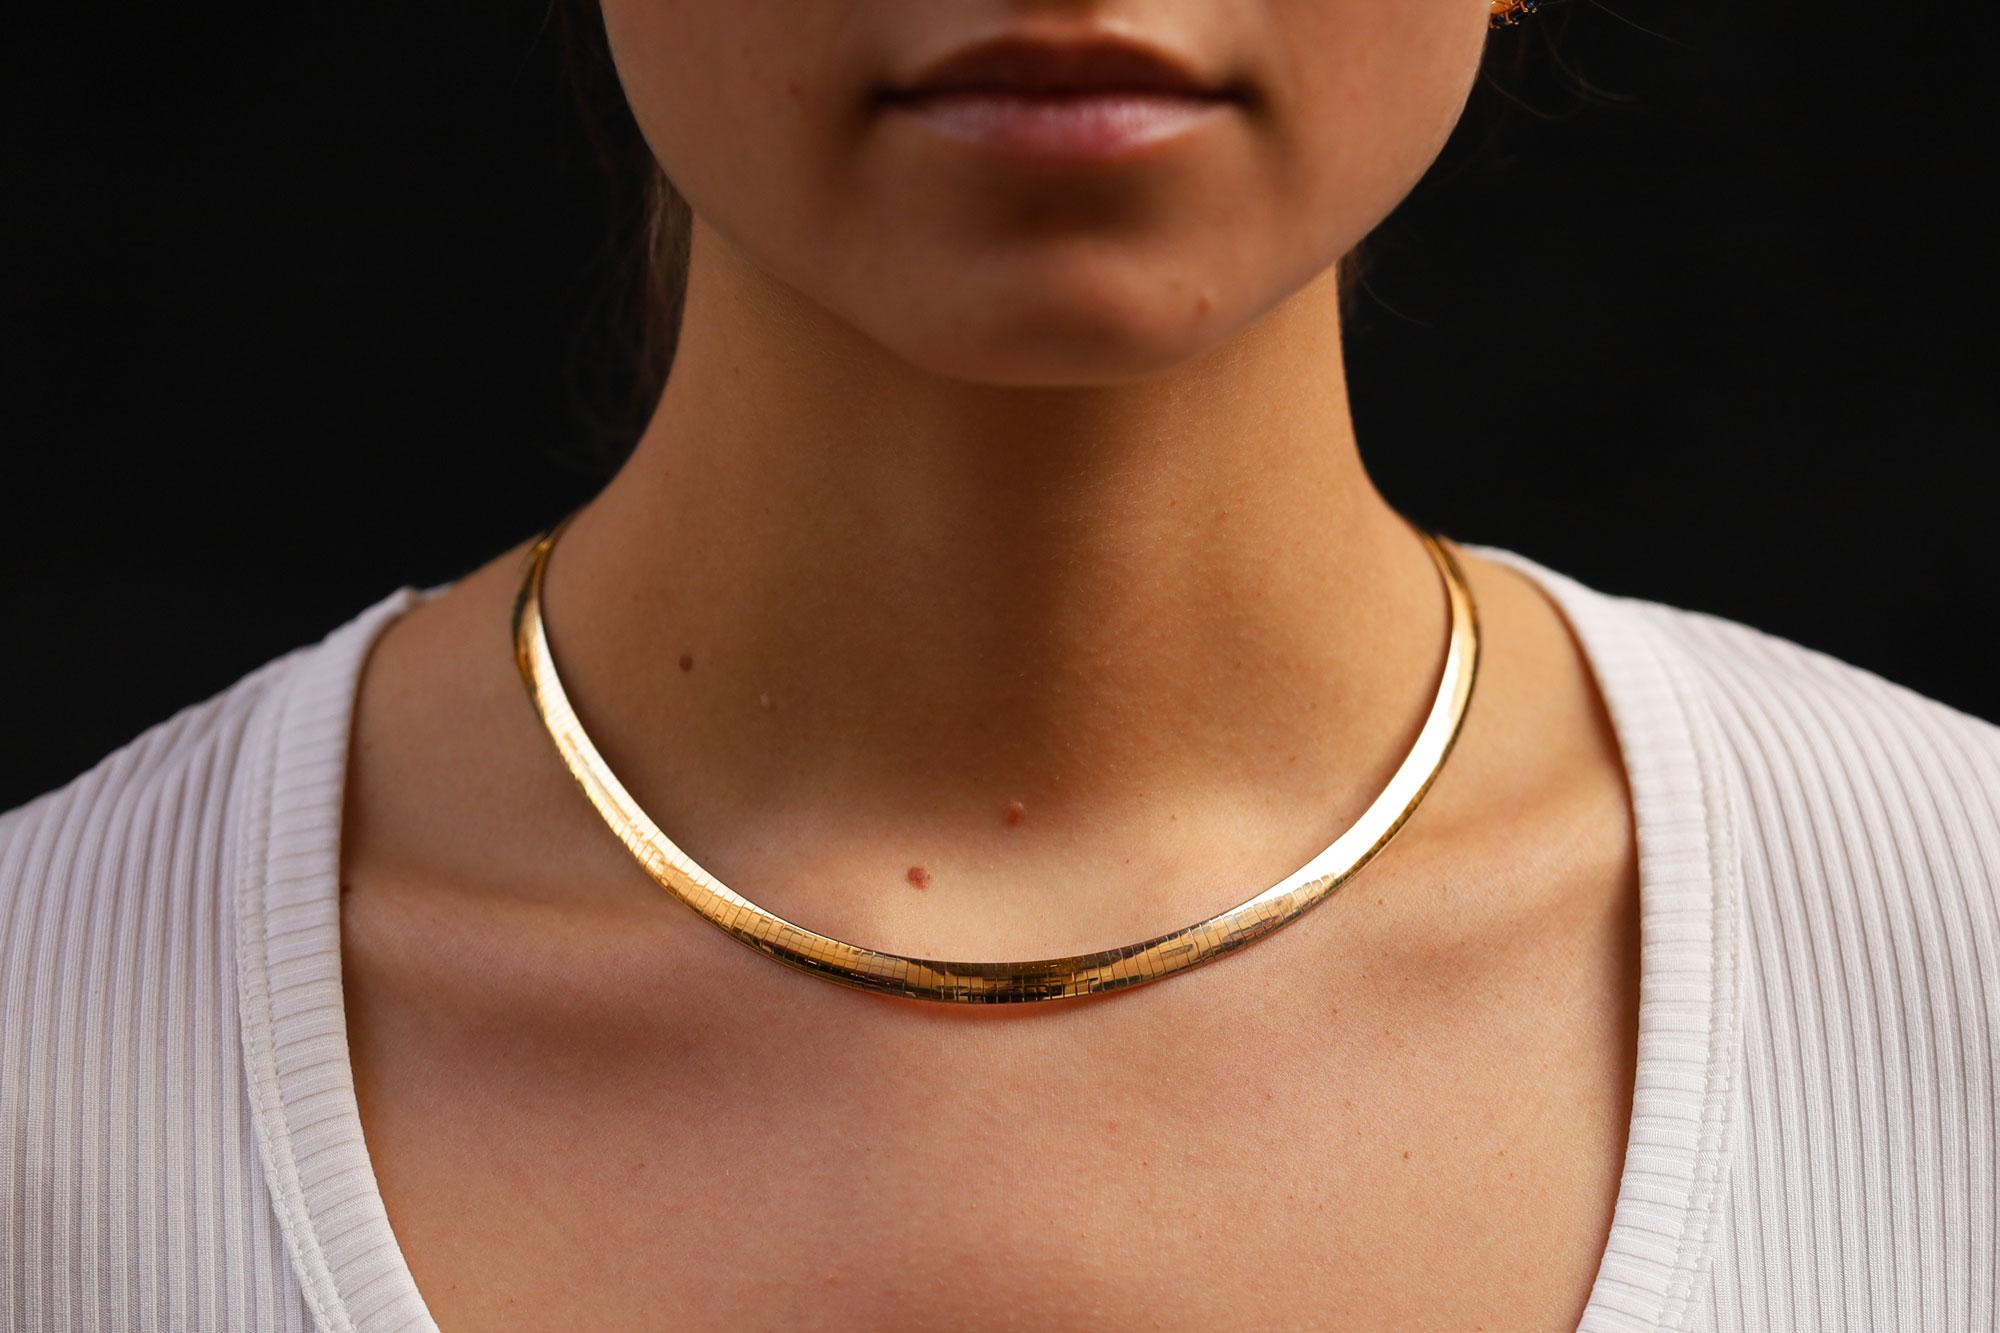 This vintage Omega necklace is a classy essential to all jewelry collections. Sustainably crafted with 1nearly one ounce of 14k gold, this, sleek, wide necklace features a reversible design with decadent yellow gold on one side, and flashy white